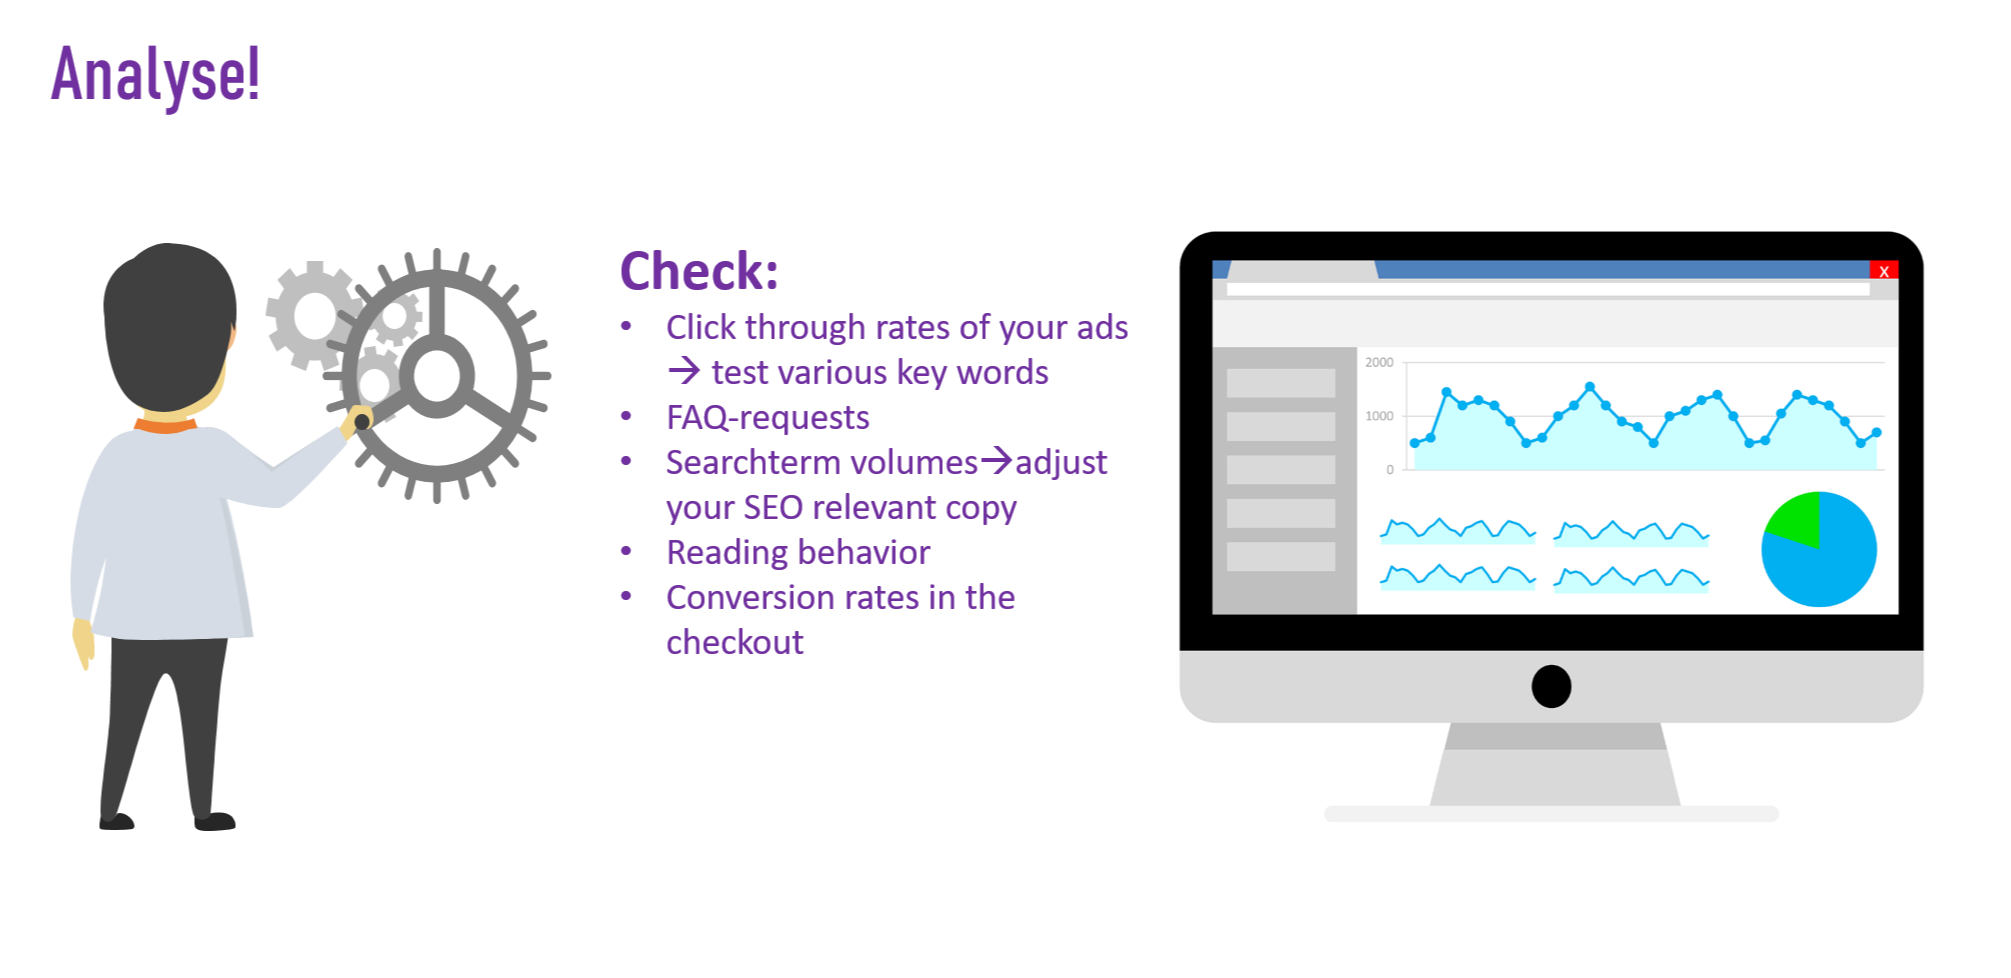 Analyze and optimize your checkout